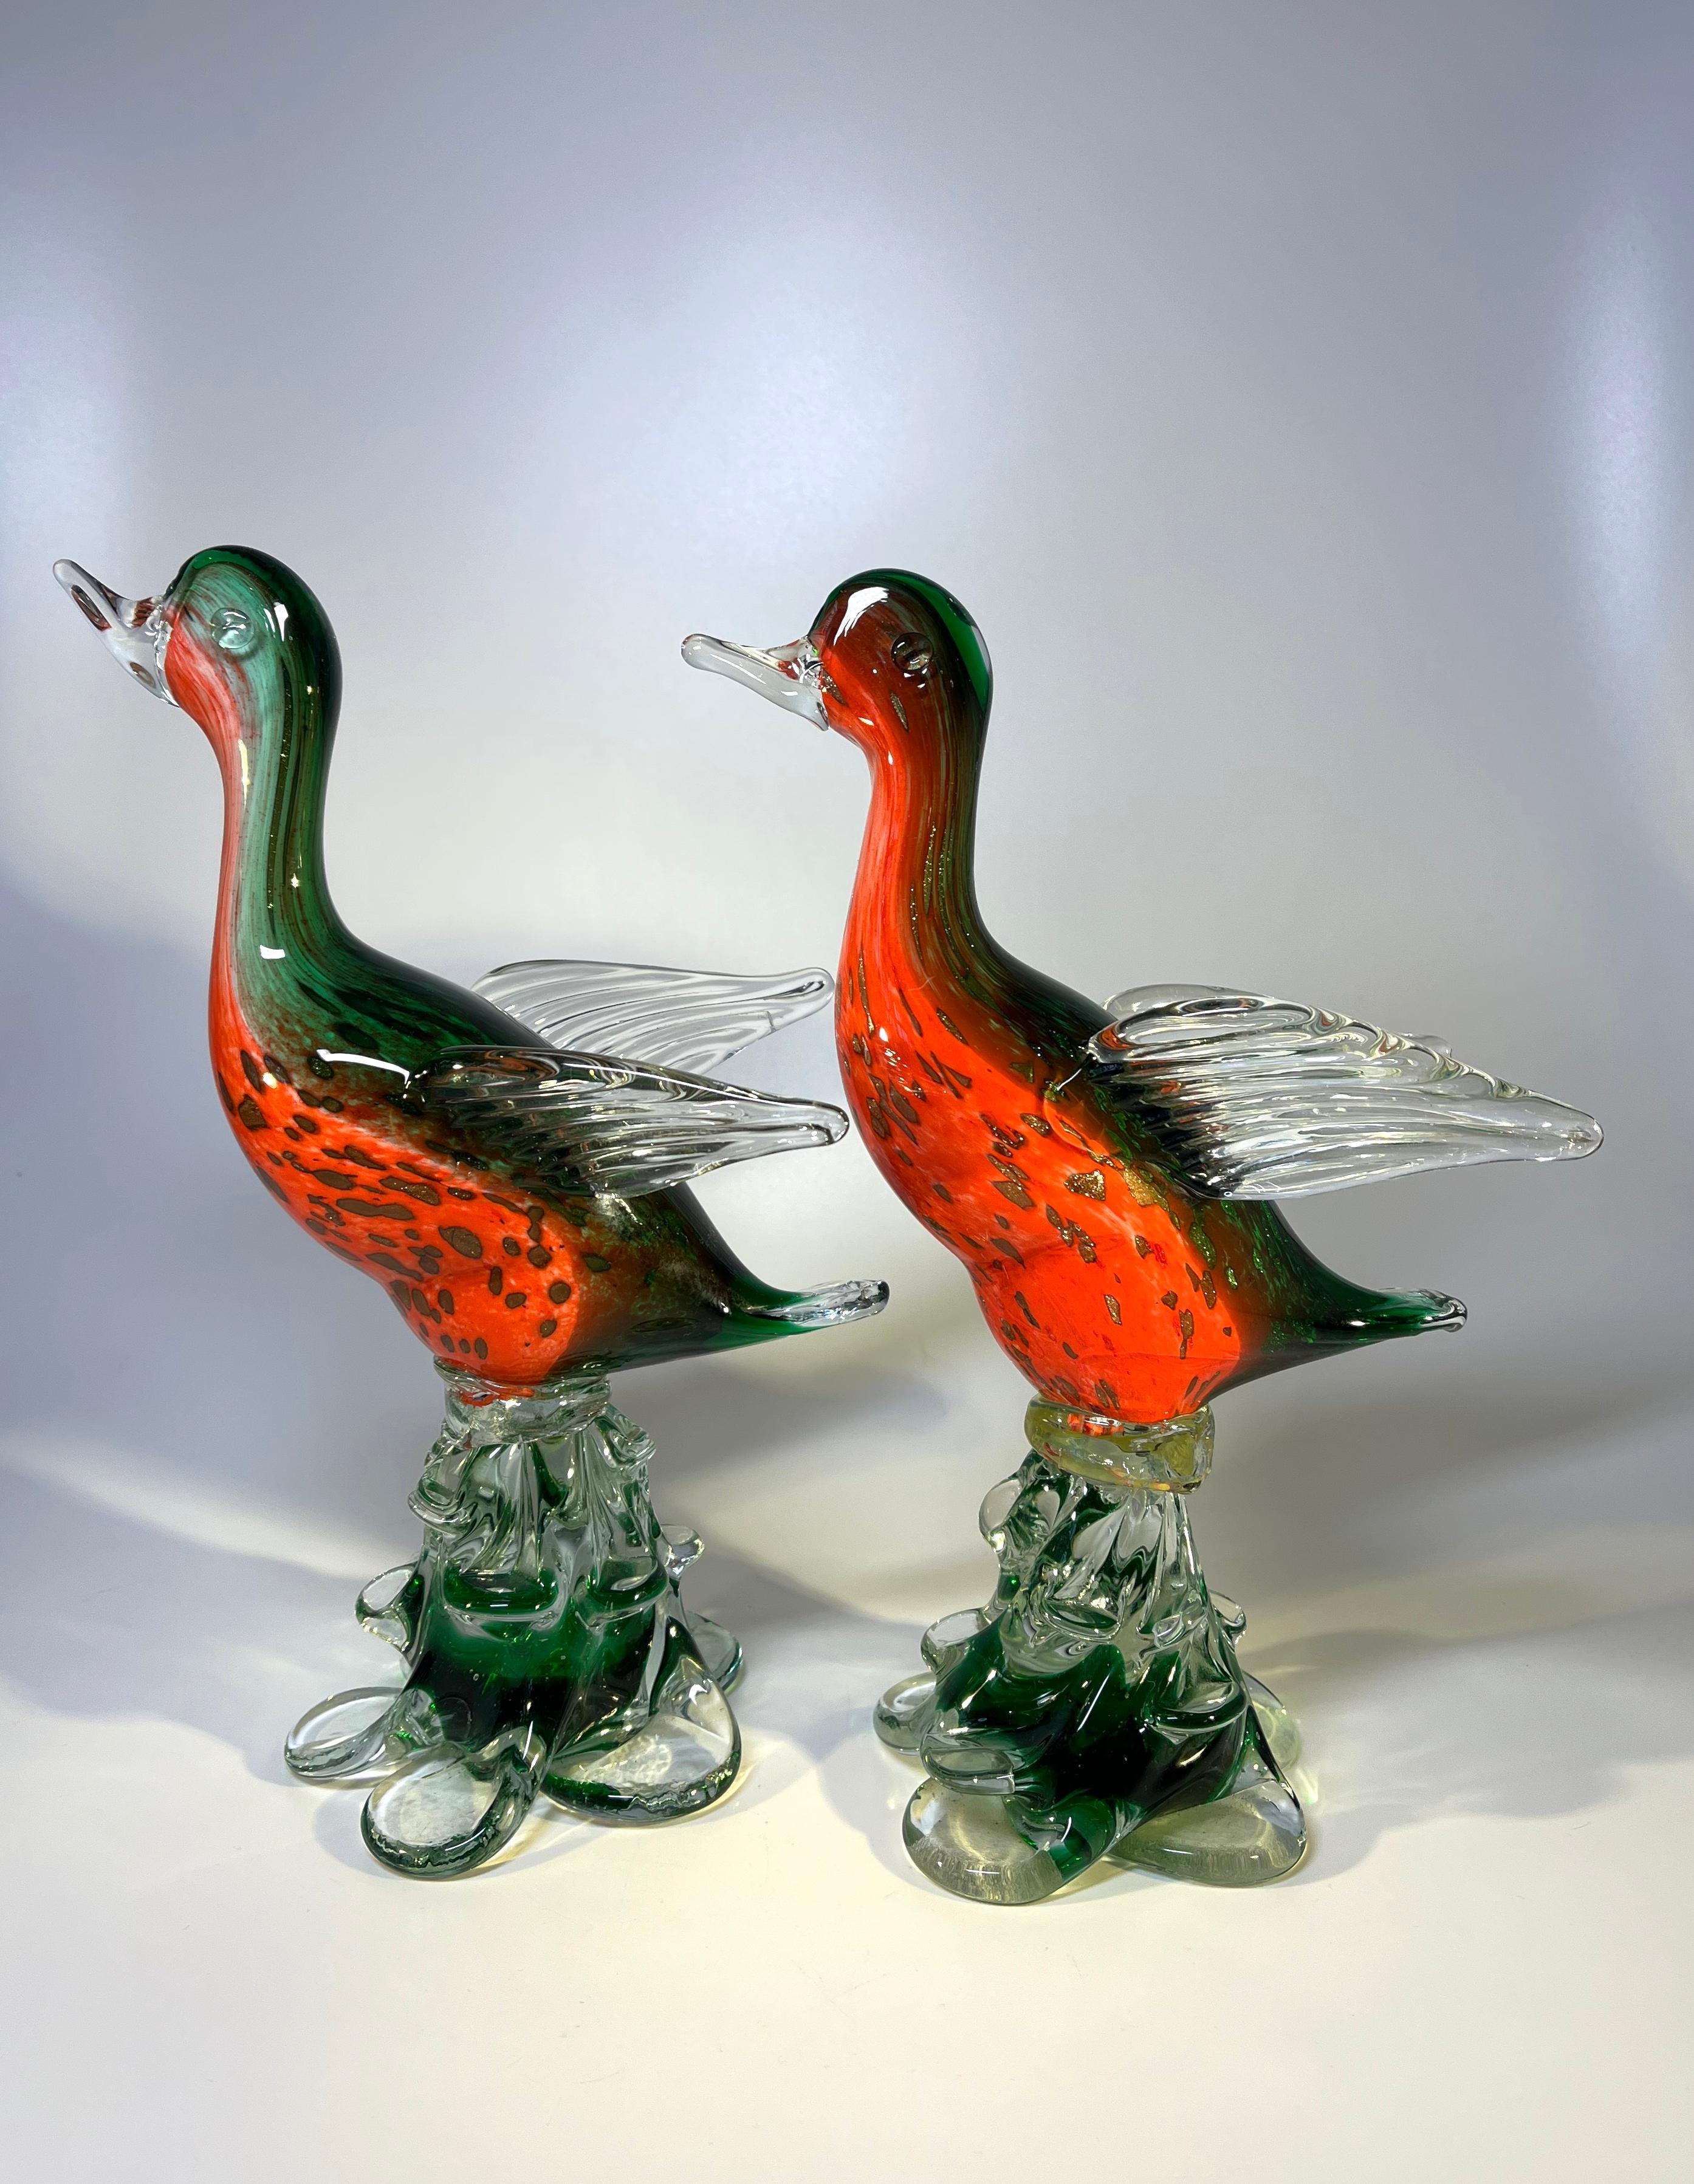 Handsome Pair of Vintage Venetian Glass Birds, Murano Hand Blown circa 1960s In Excellent Condition For Sale In Rothley, Leicestershire